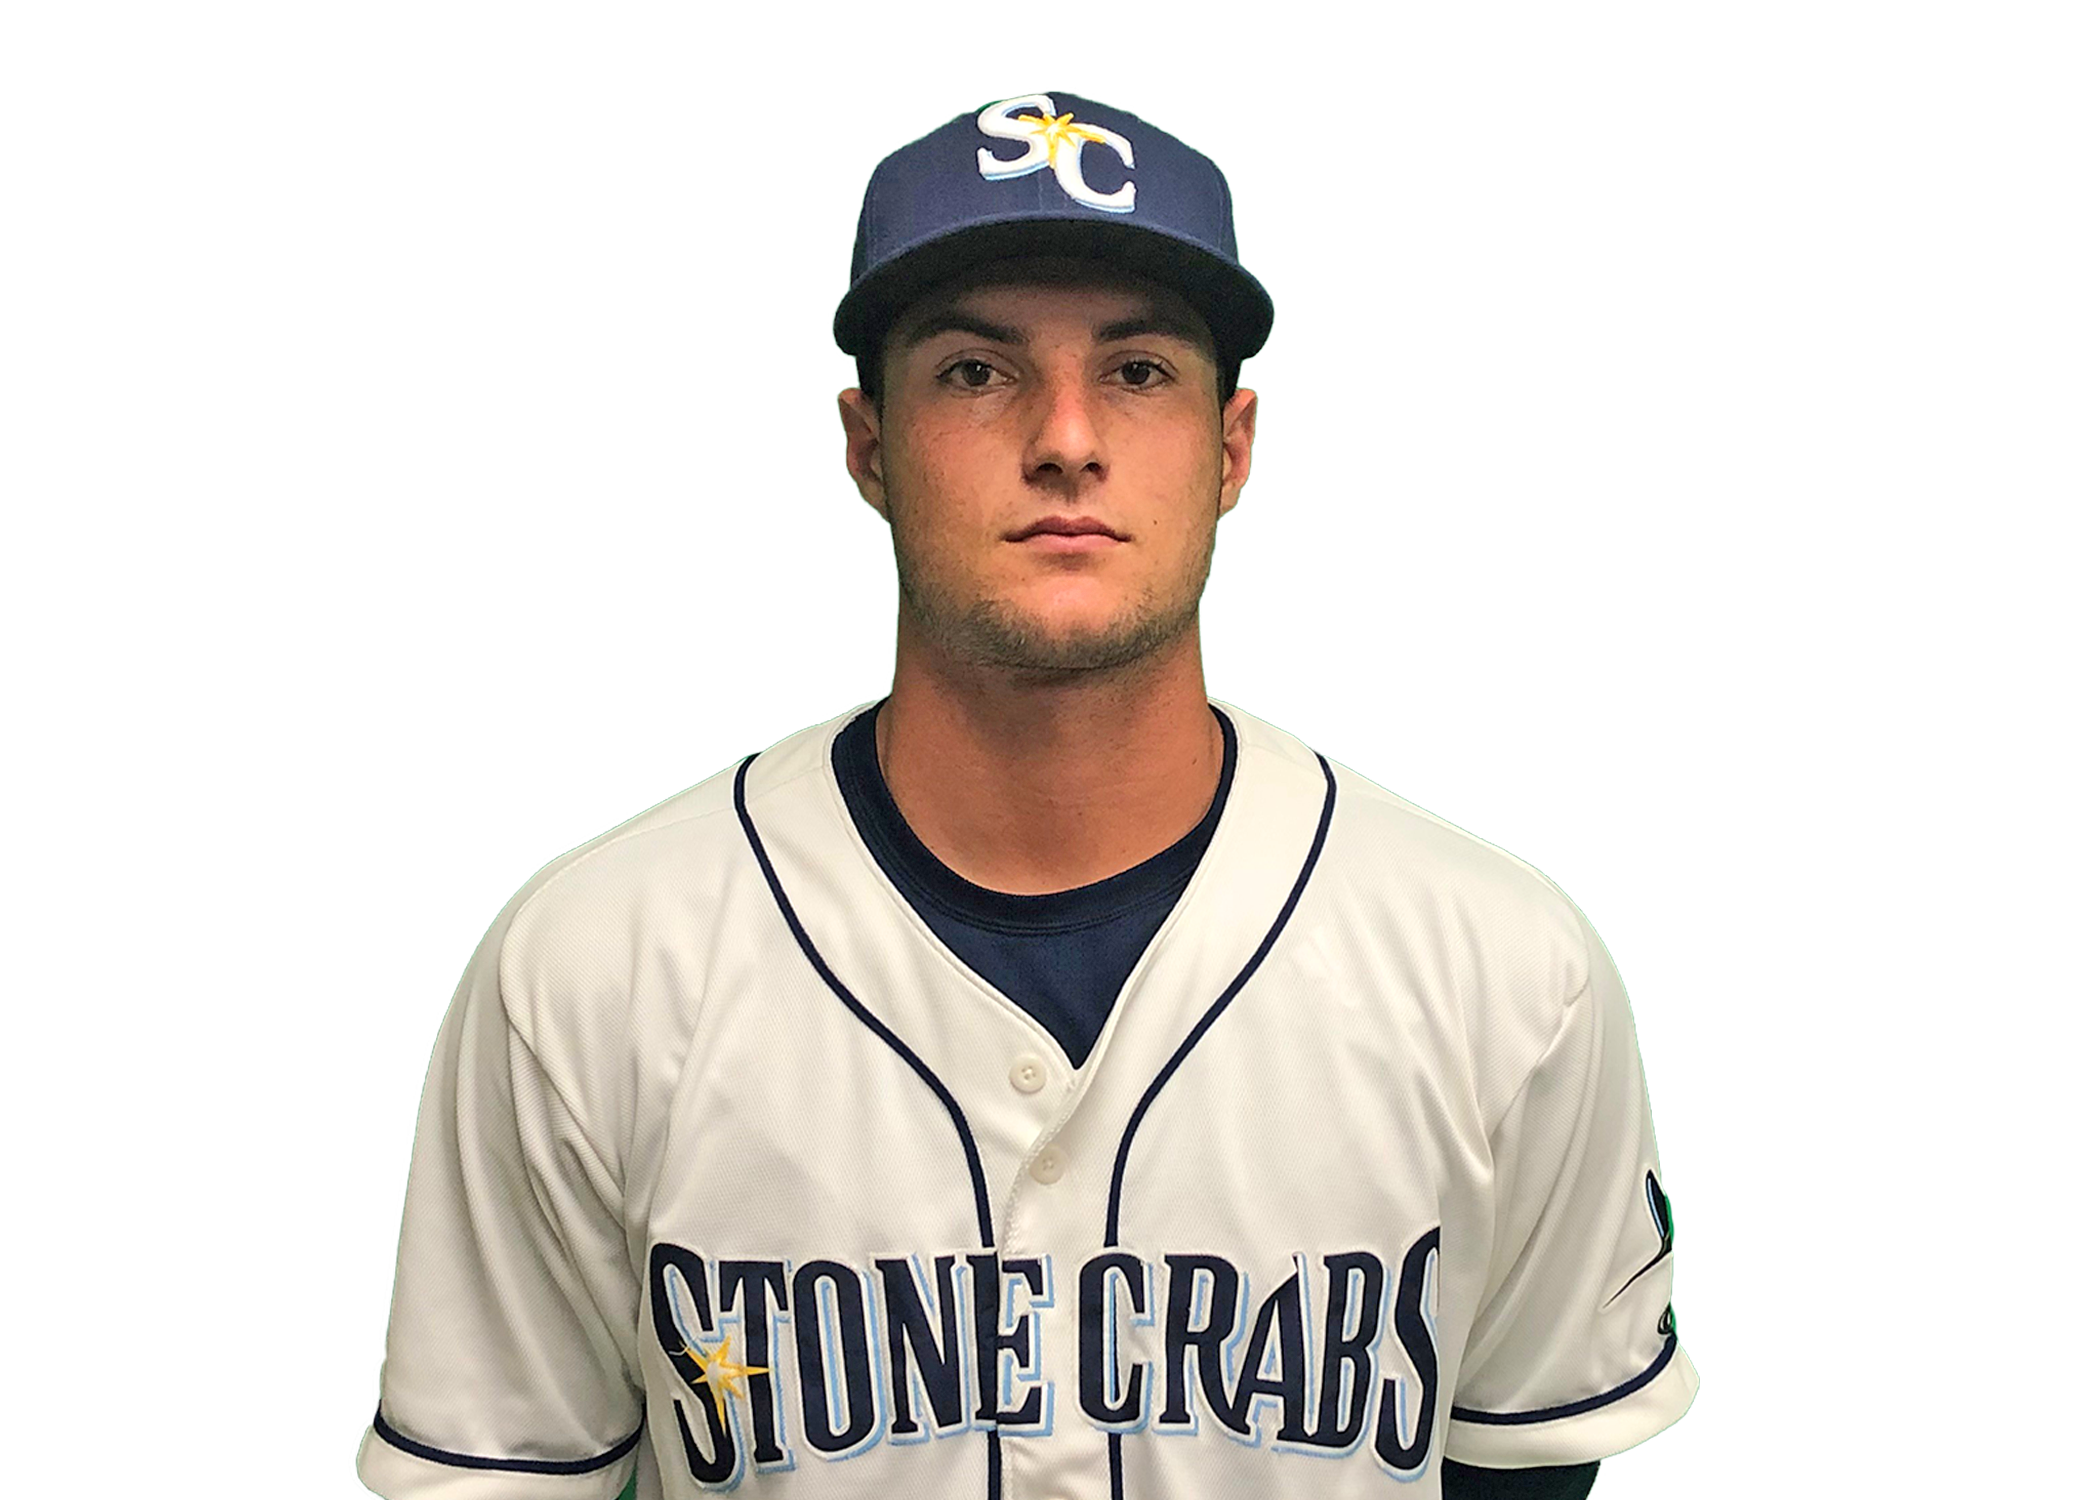 charlotte stone crabs jersey